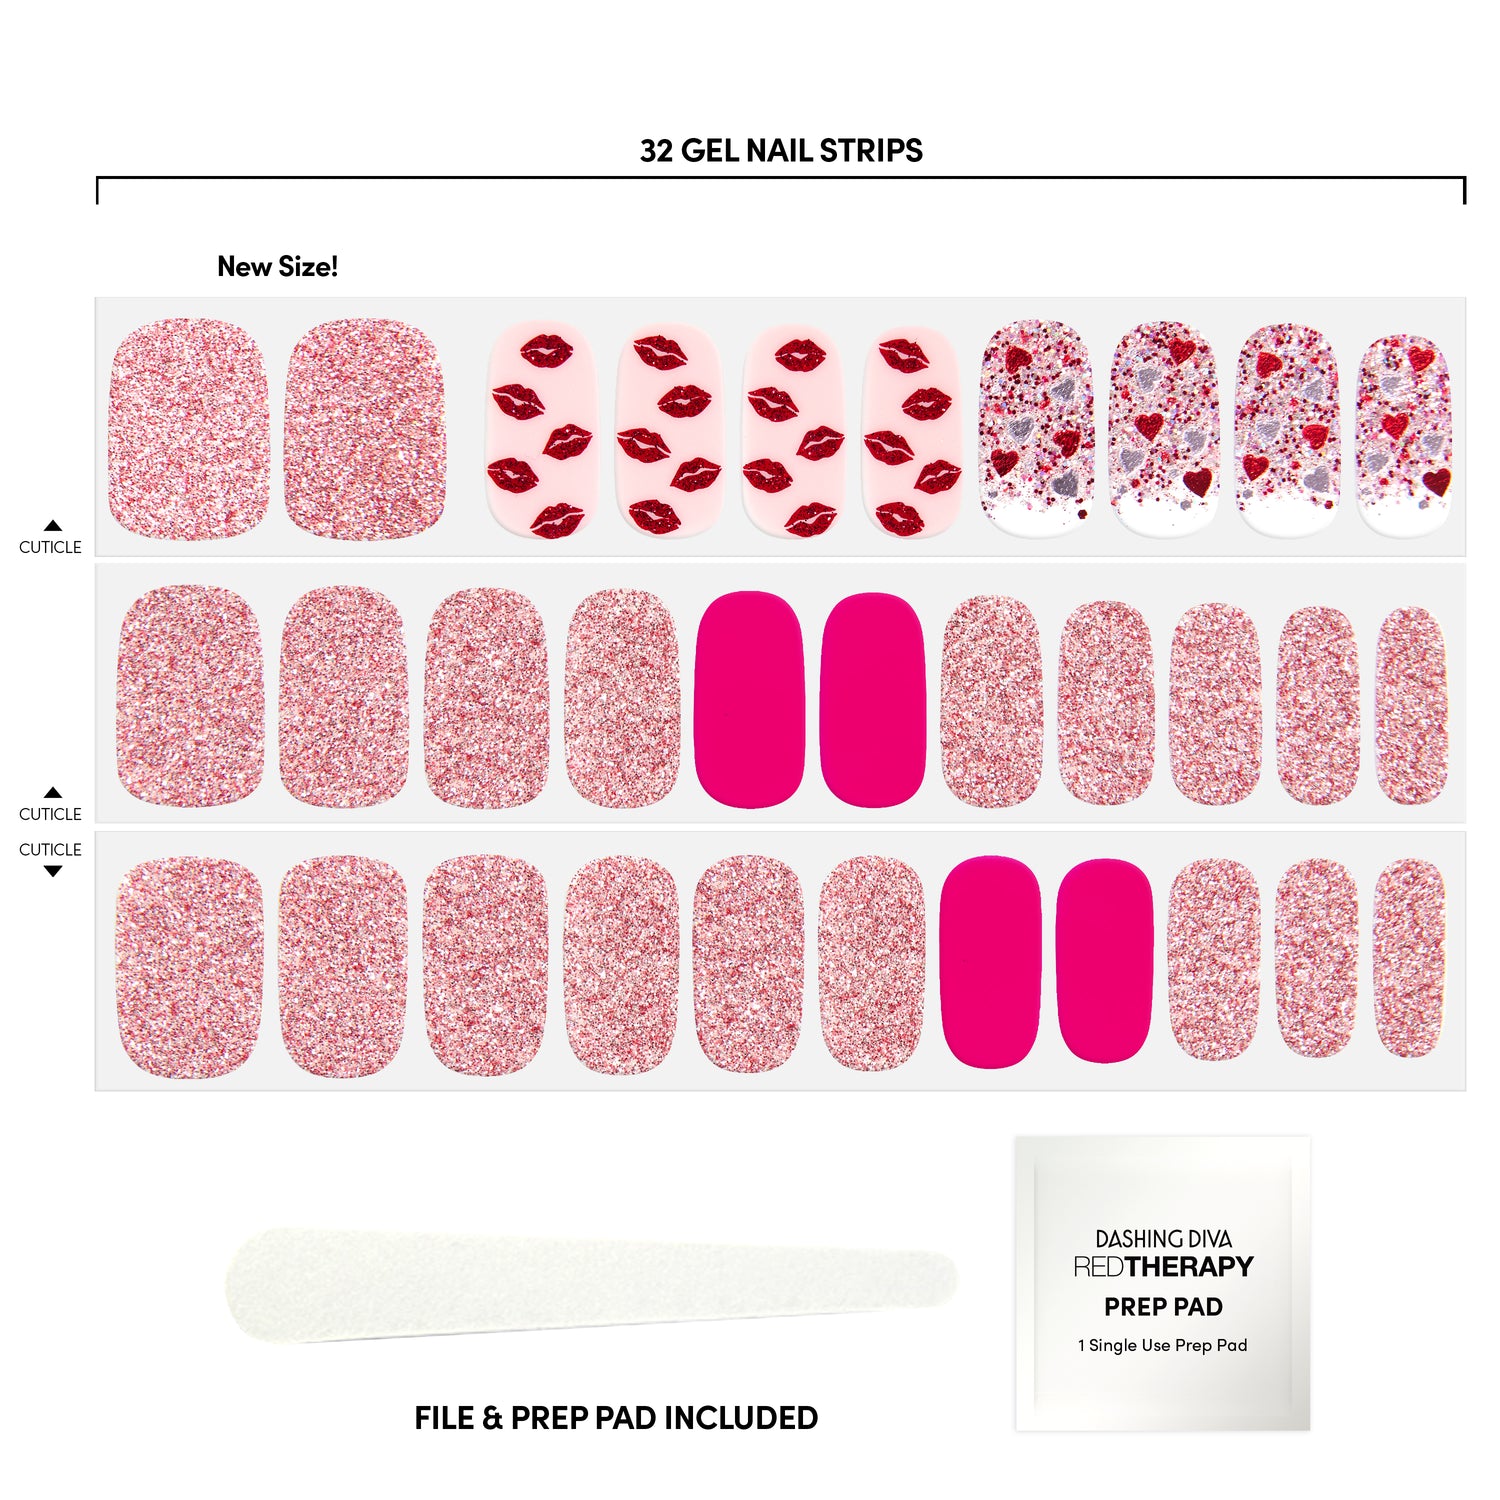 Multichromatic pink gel strips featuring glitter, lipstick kisses, and flirty confetti glitter. Included within package prep pad with nail file. 